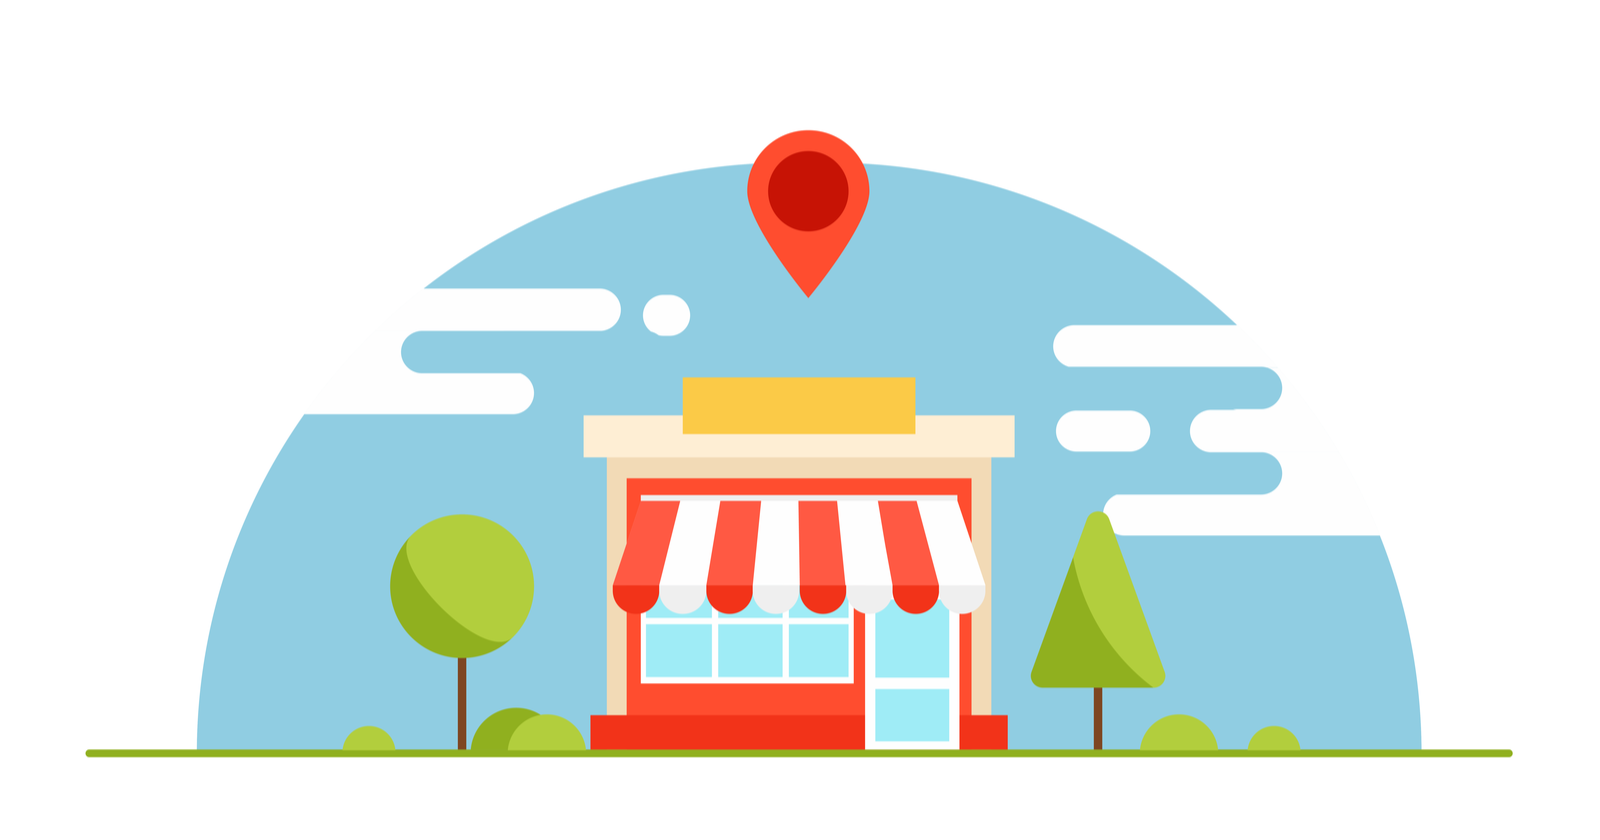 7 Local SEO Updates From 2021 That Will Impact Your Planning via @sejournal, @Juxtacognition